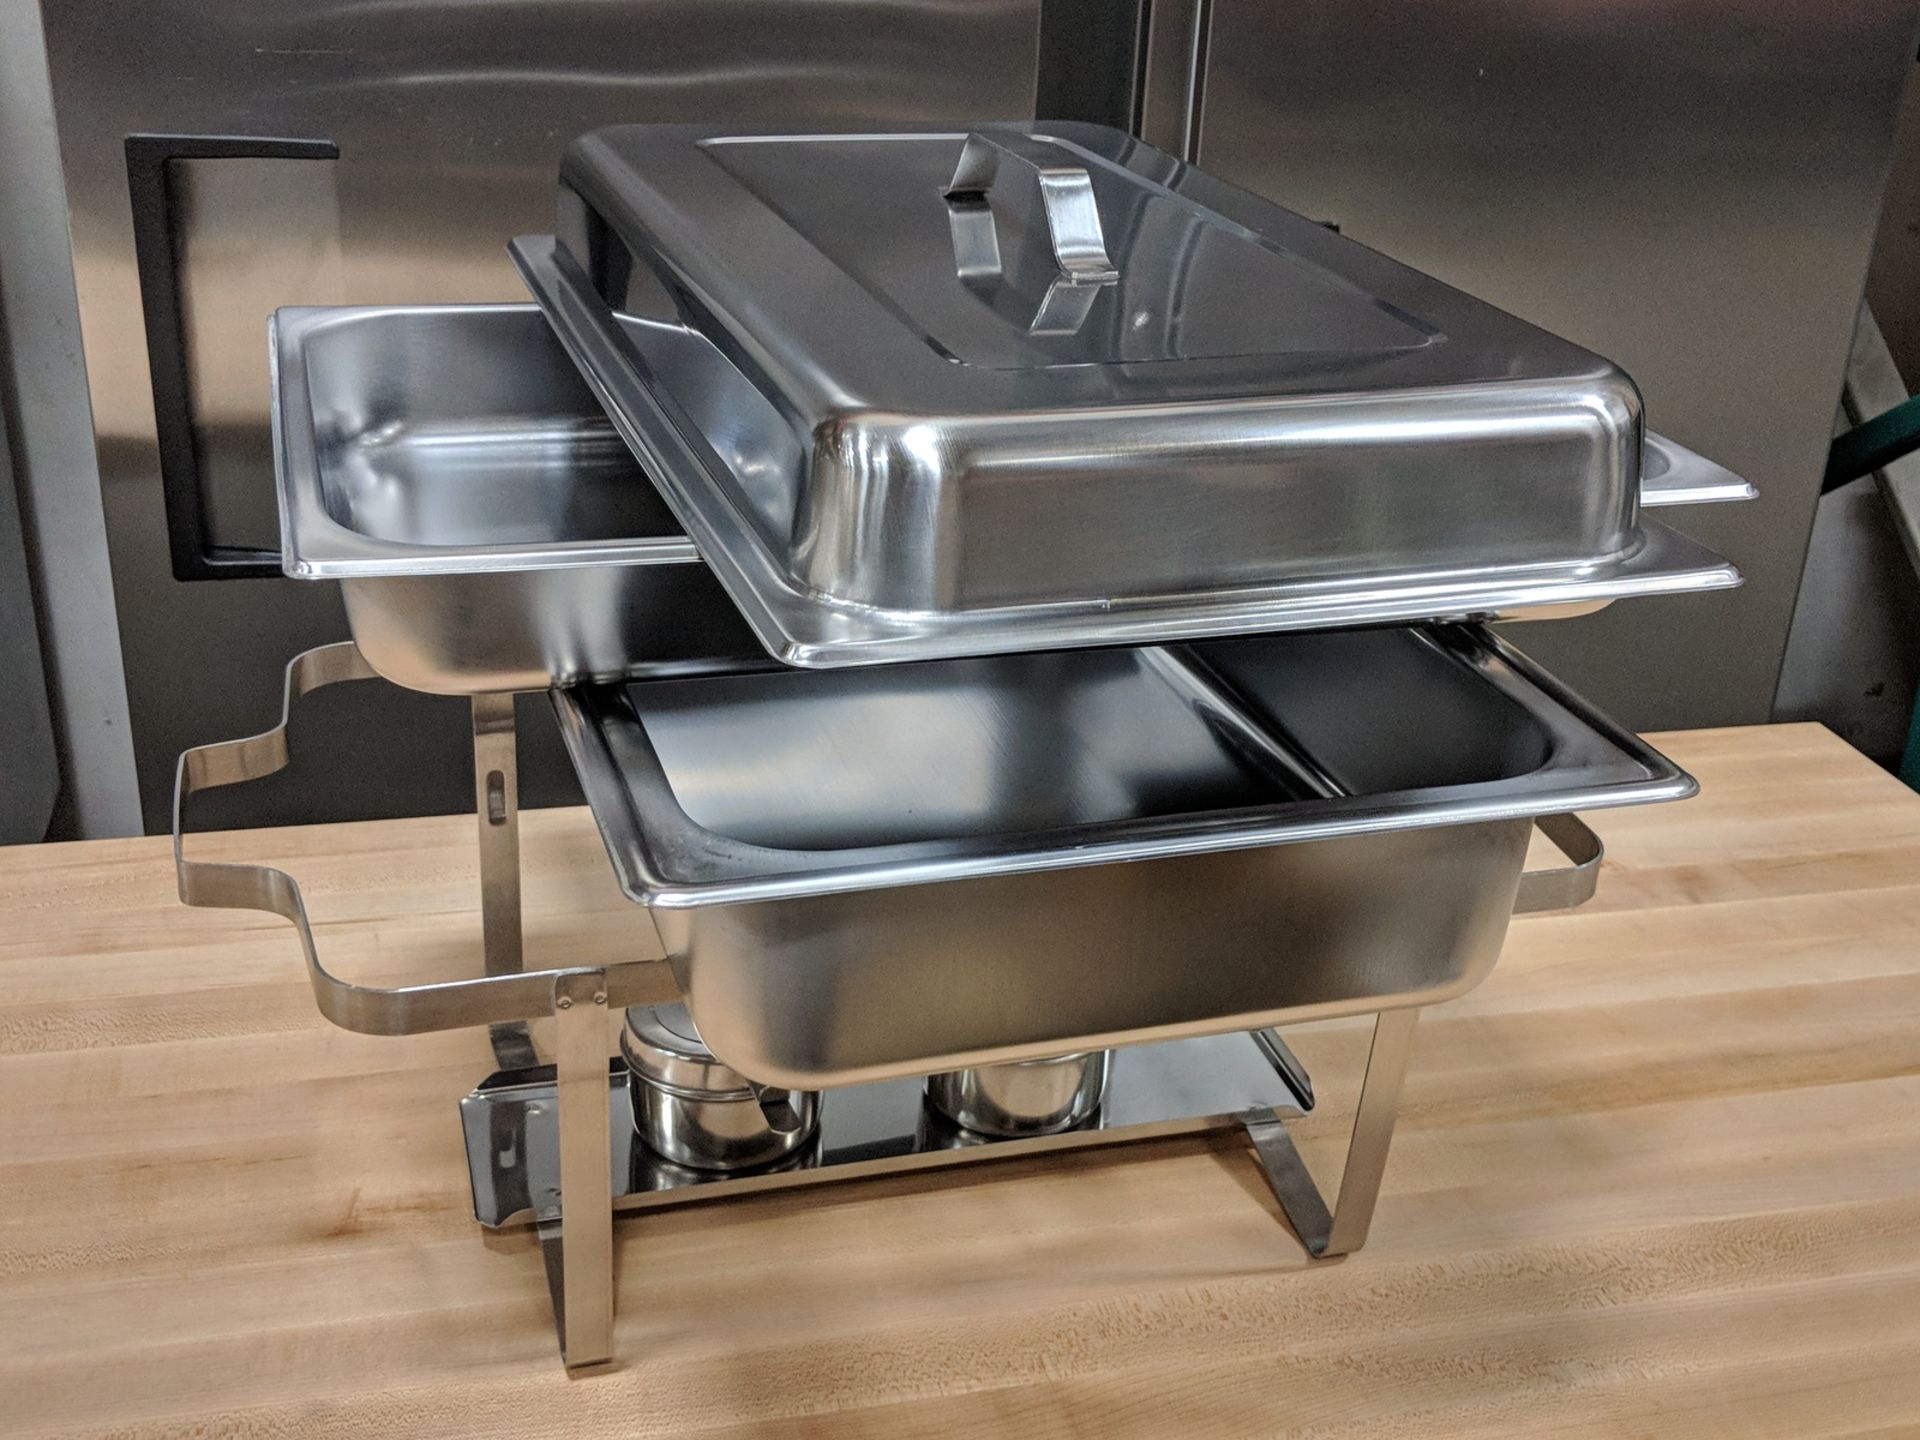 Full Size Chafer - Frame, Fuel Holder, Water Pan, 2.5" Insert and Lid, Update SCC-19 - Image 2 of 8